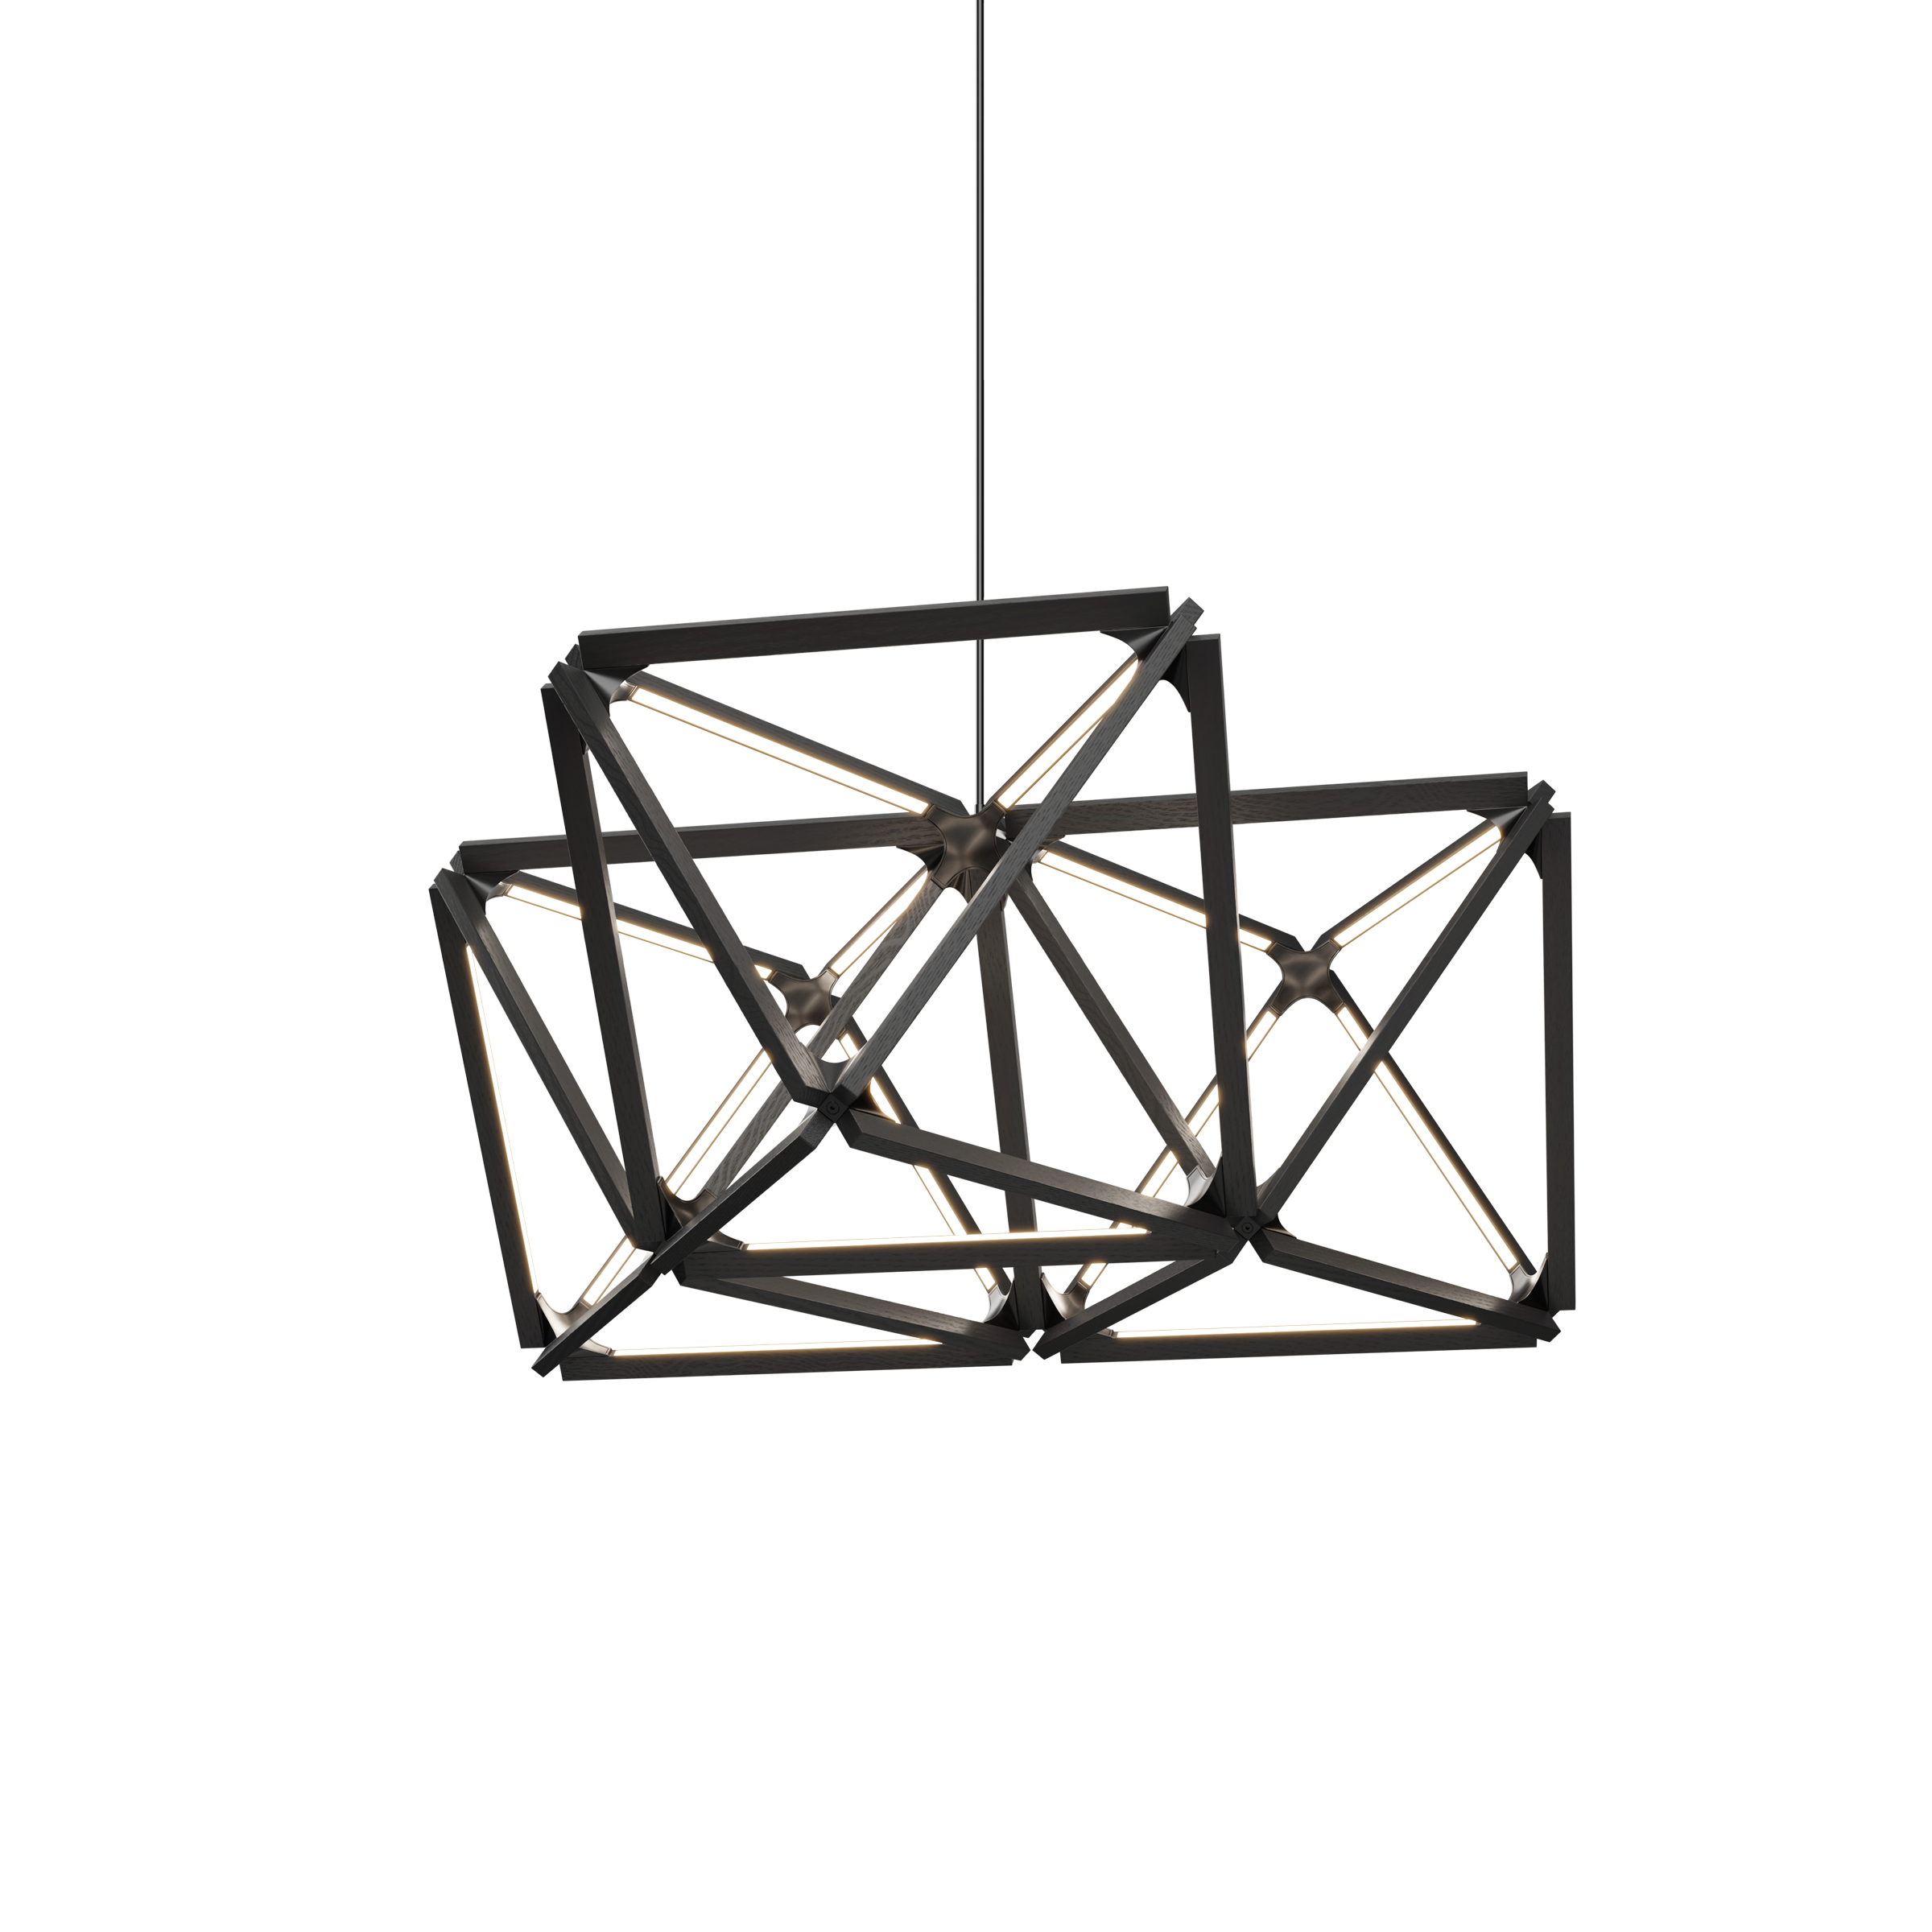 Image of a Stickbulb Triple X lighting fixture. The modern fixture consists of sleek wooden beams with multiple integrated LED bulbs.